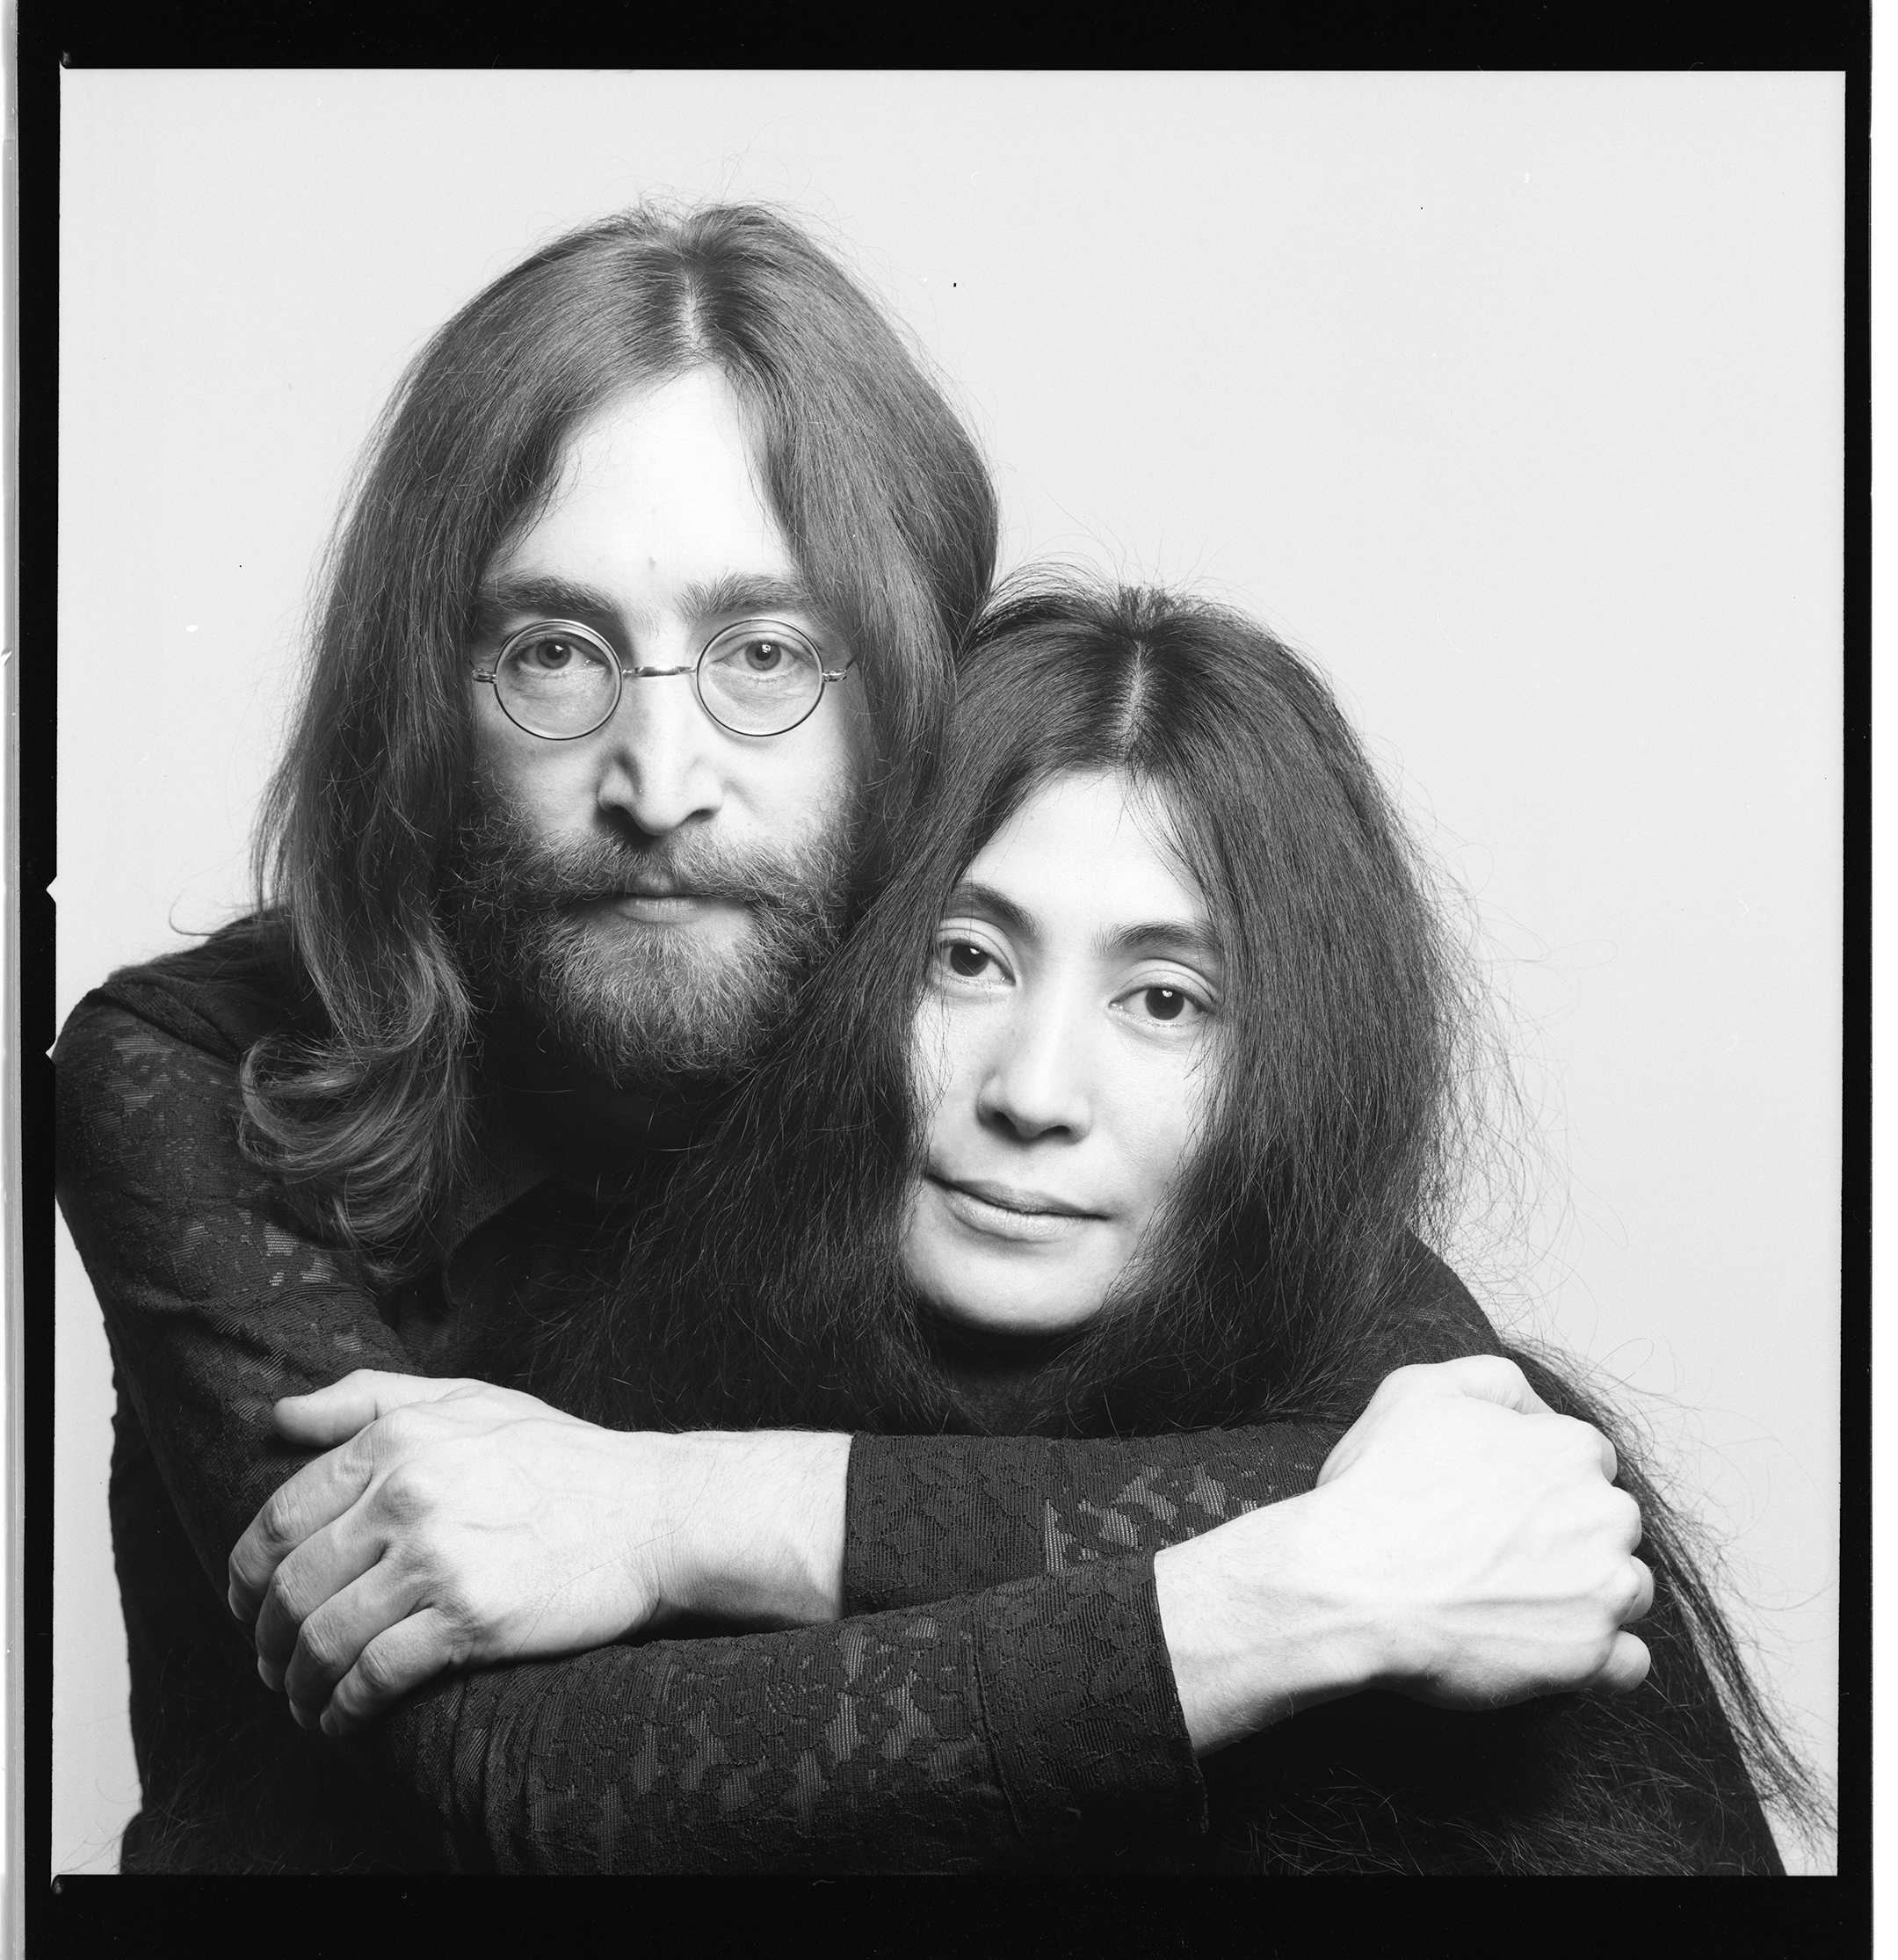 Yoko Ono From Liverpool To Tokyo What A Way To Go 𝗗𝗢𝗨𝗕𝗟𝗘 𝗙𝗔𝗡𝗧𝗔𝗦𝗬 𝗝𝗼𝗵𝗻 Amp 𝗬𝗼𝗸𝗼 The Record Breaking Exhibition From Museumliverpool Travels To Tokyo To Open At